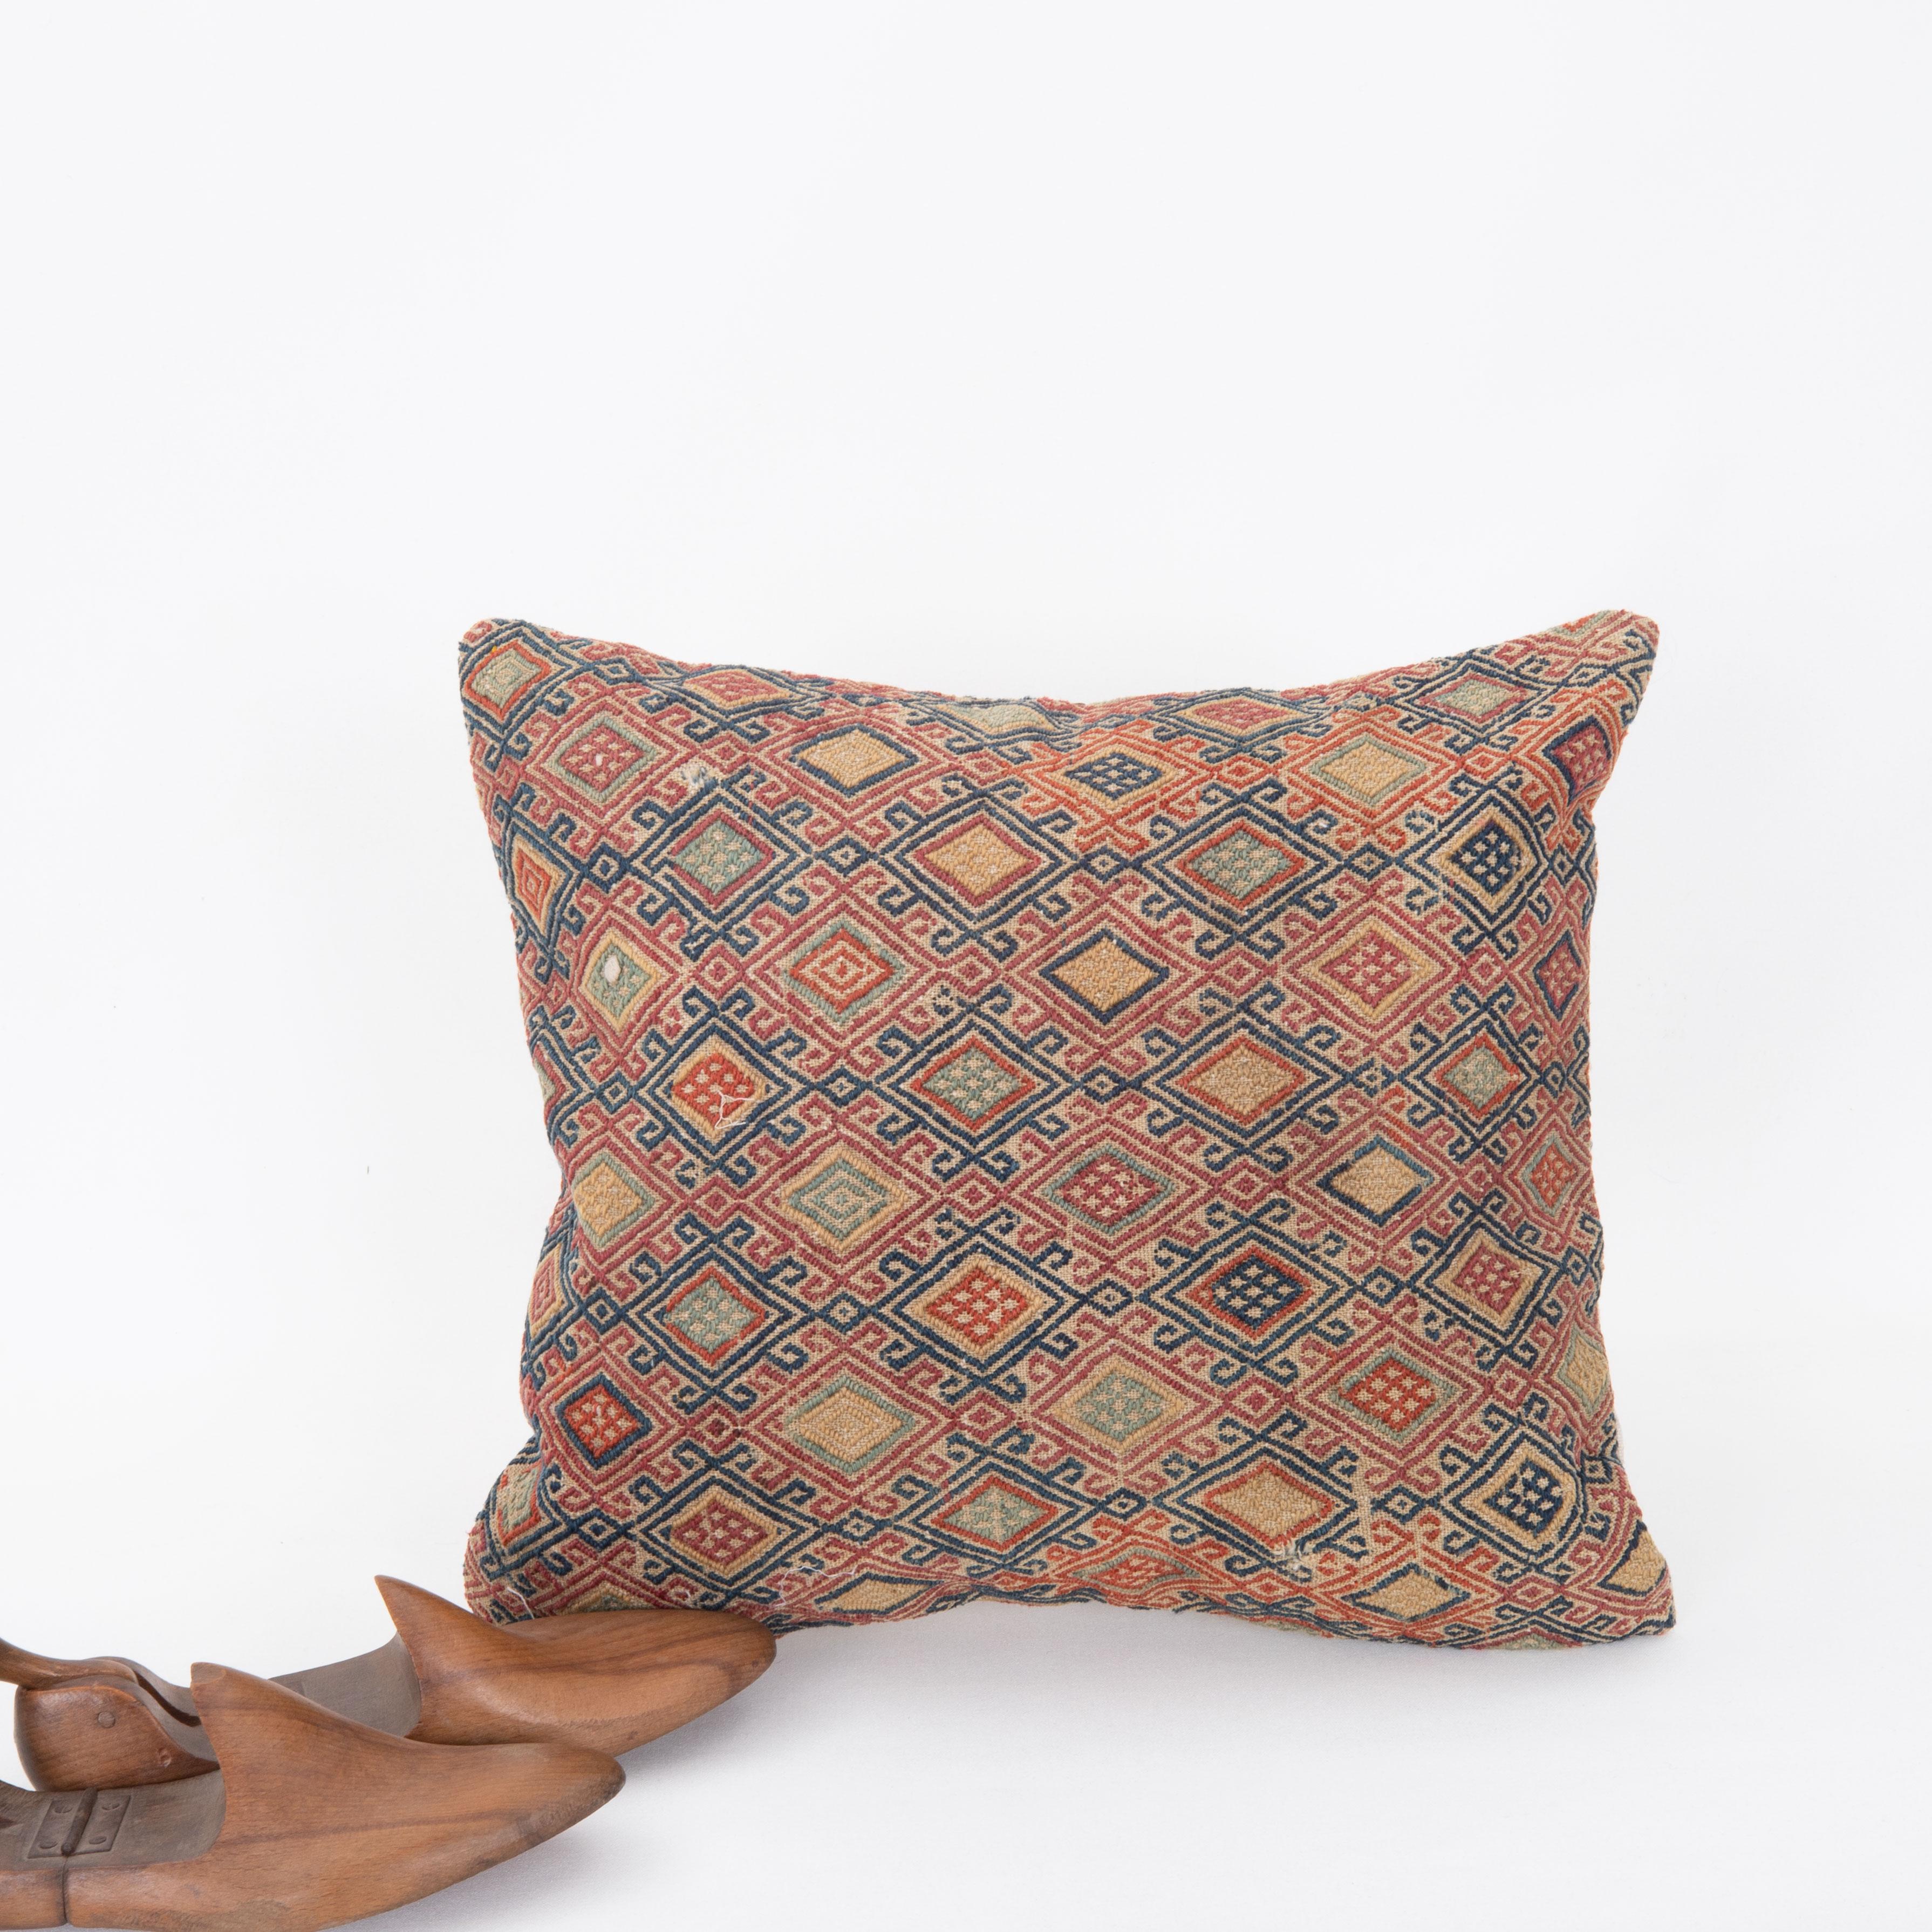 Turkish Pillow Cover Fashioned from an Antique Anatolian Cicim Bag Face